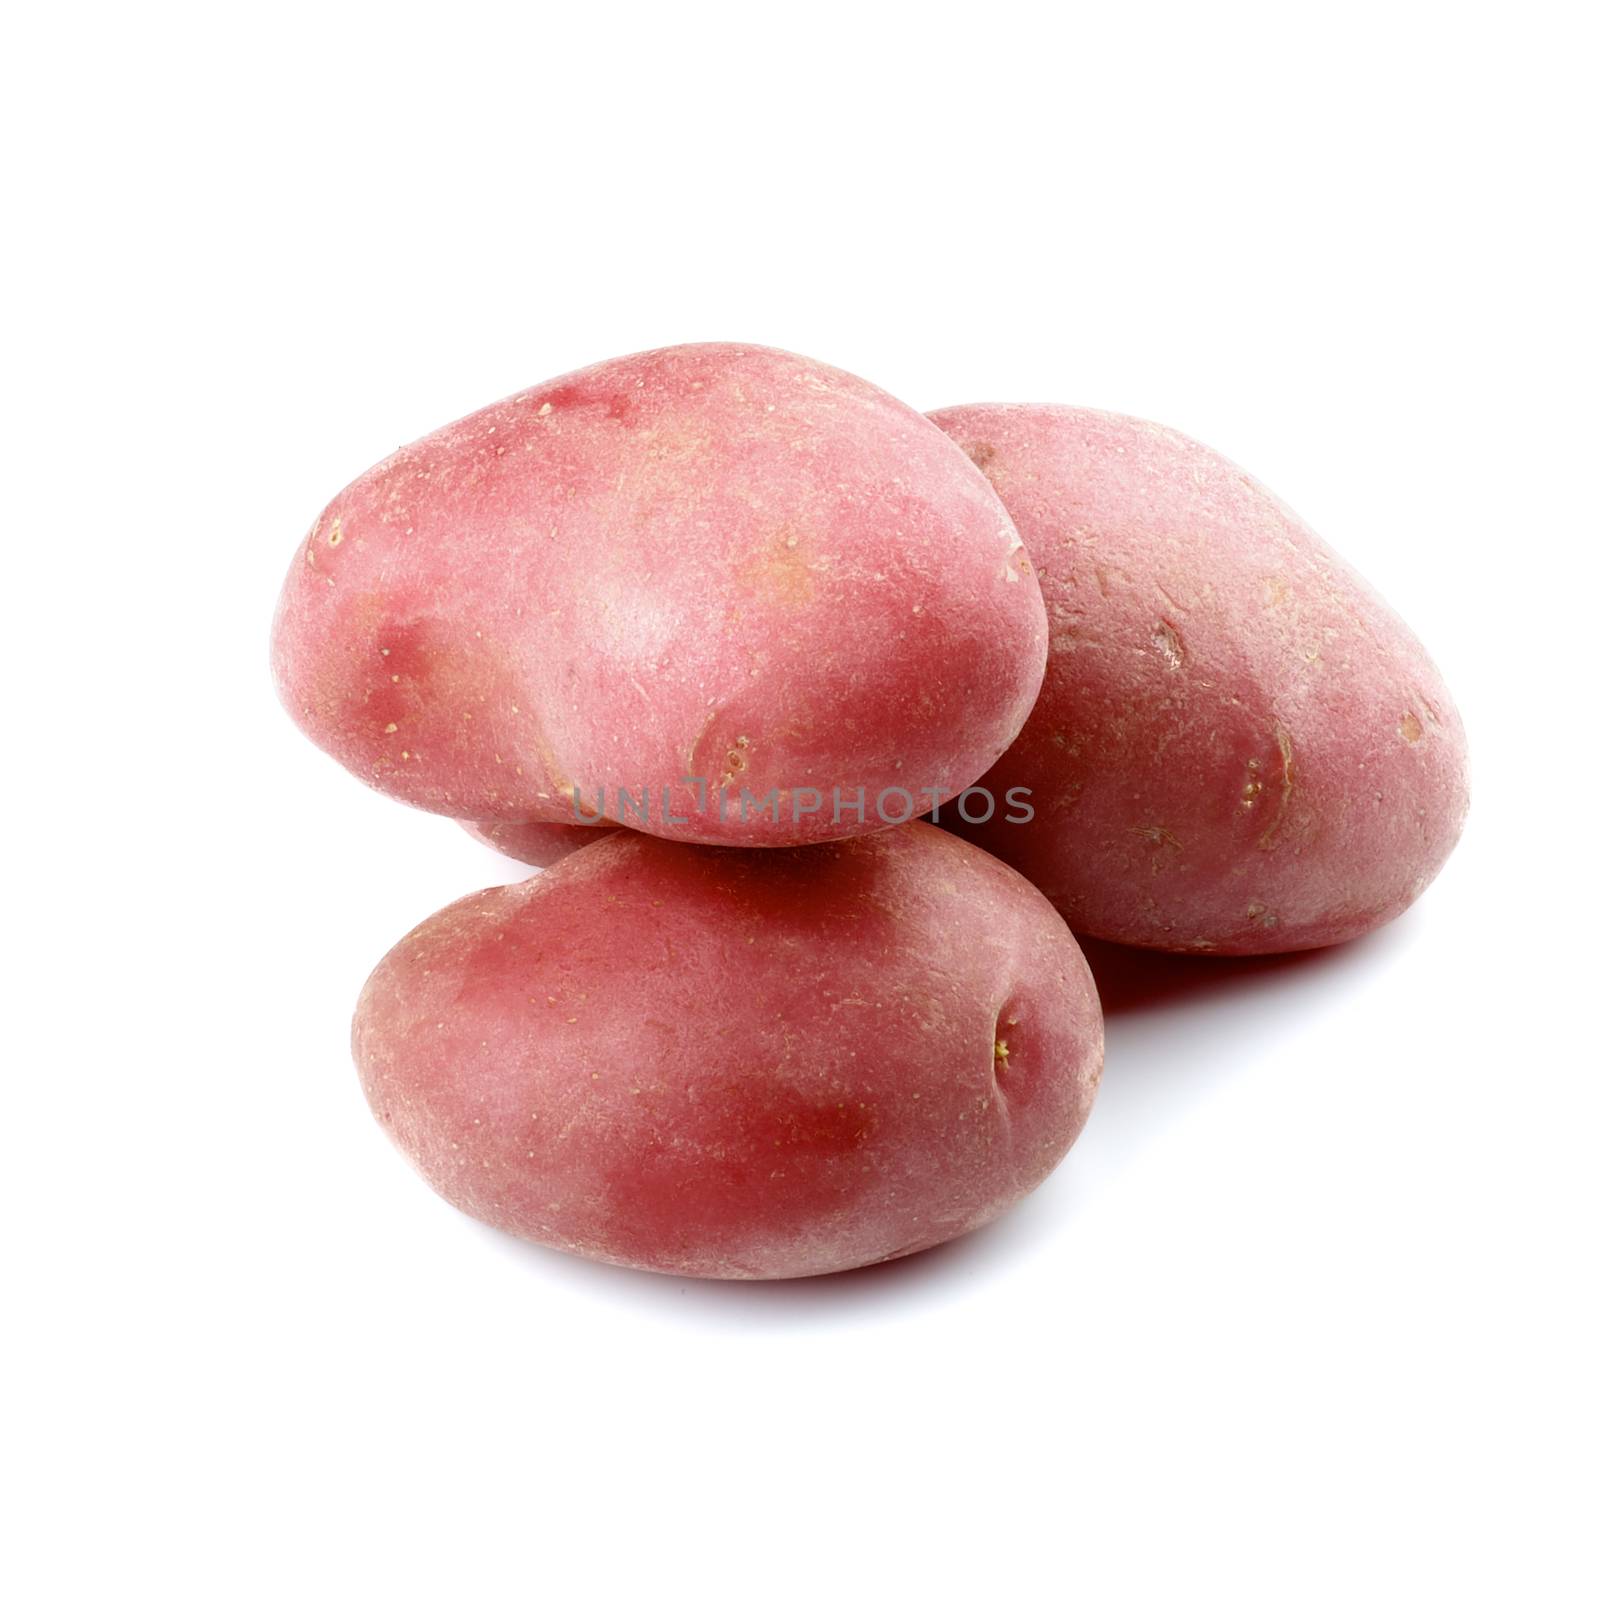 Three Big Raw Red Fingerling Potatoes isolated on white background